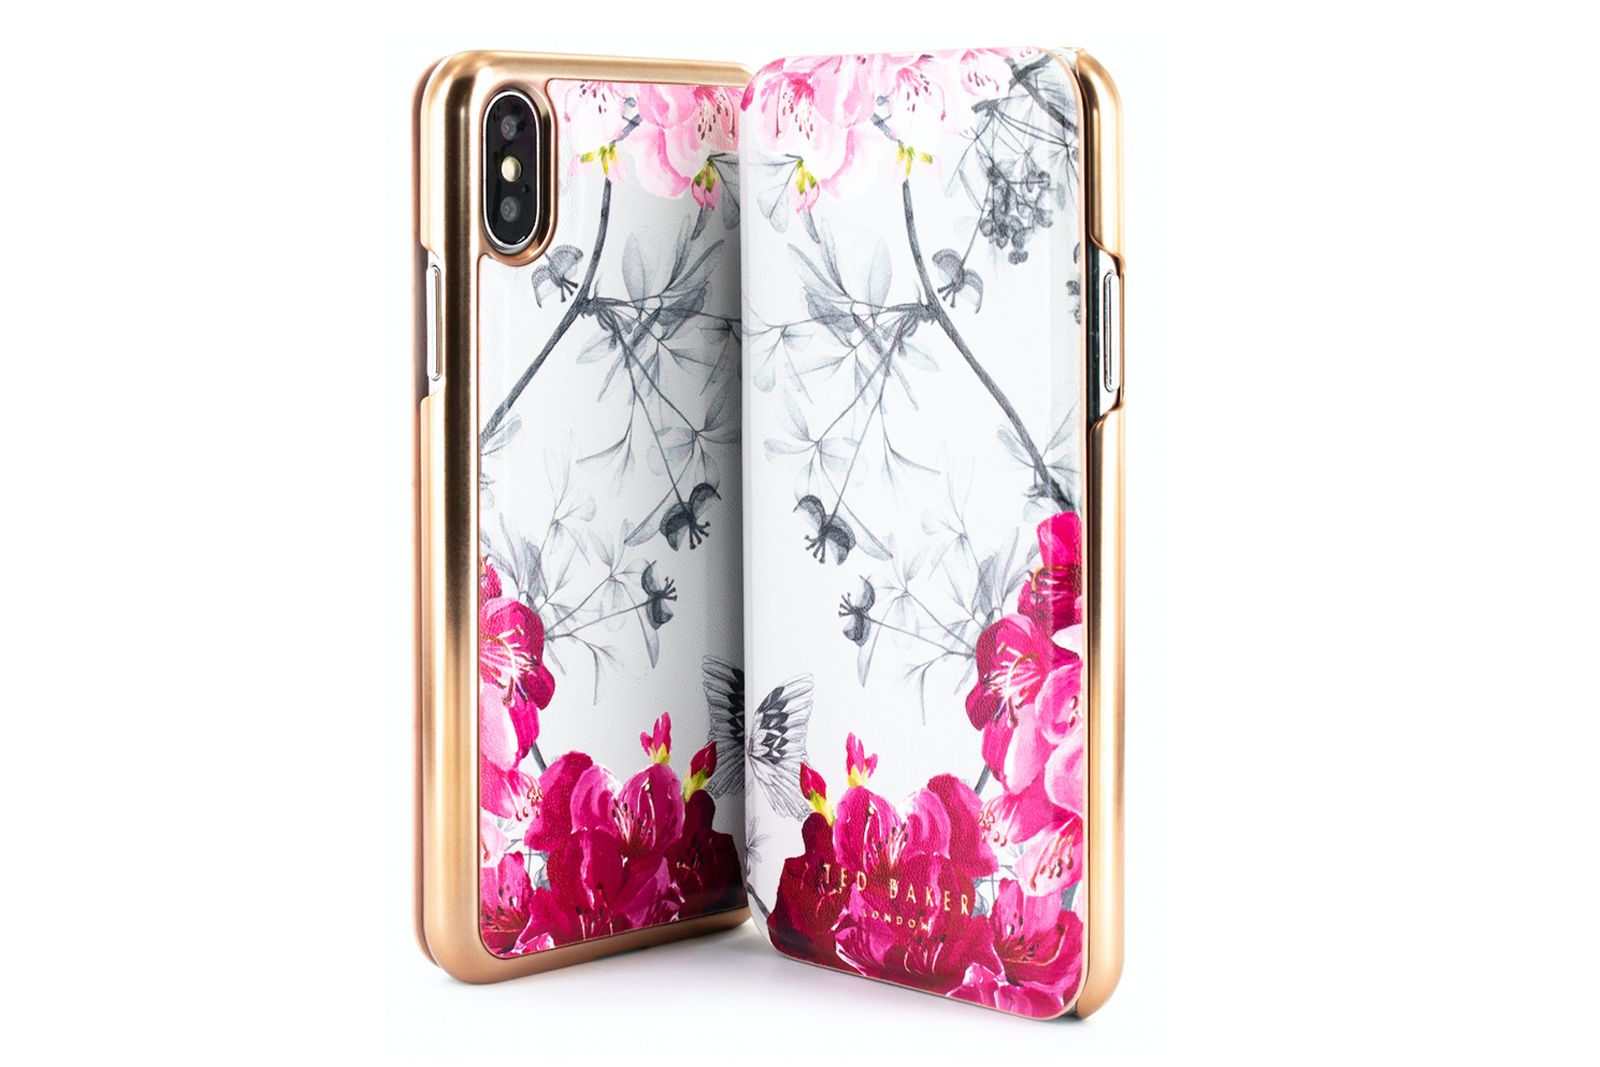 Best Iphone Xs And Xs Max Cases Protect Your New Apple Smartphone image 12